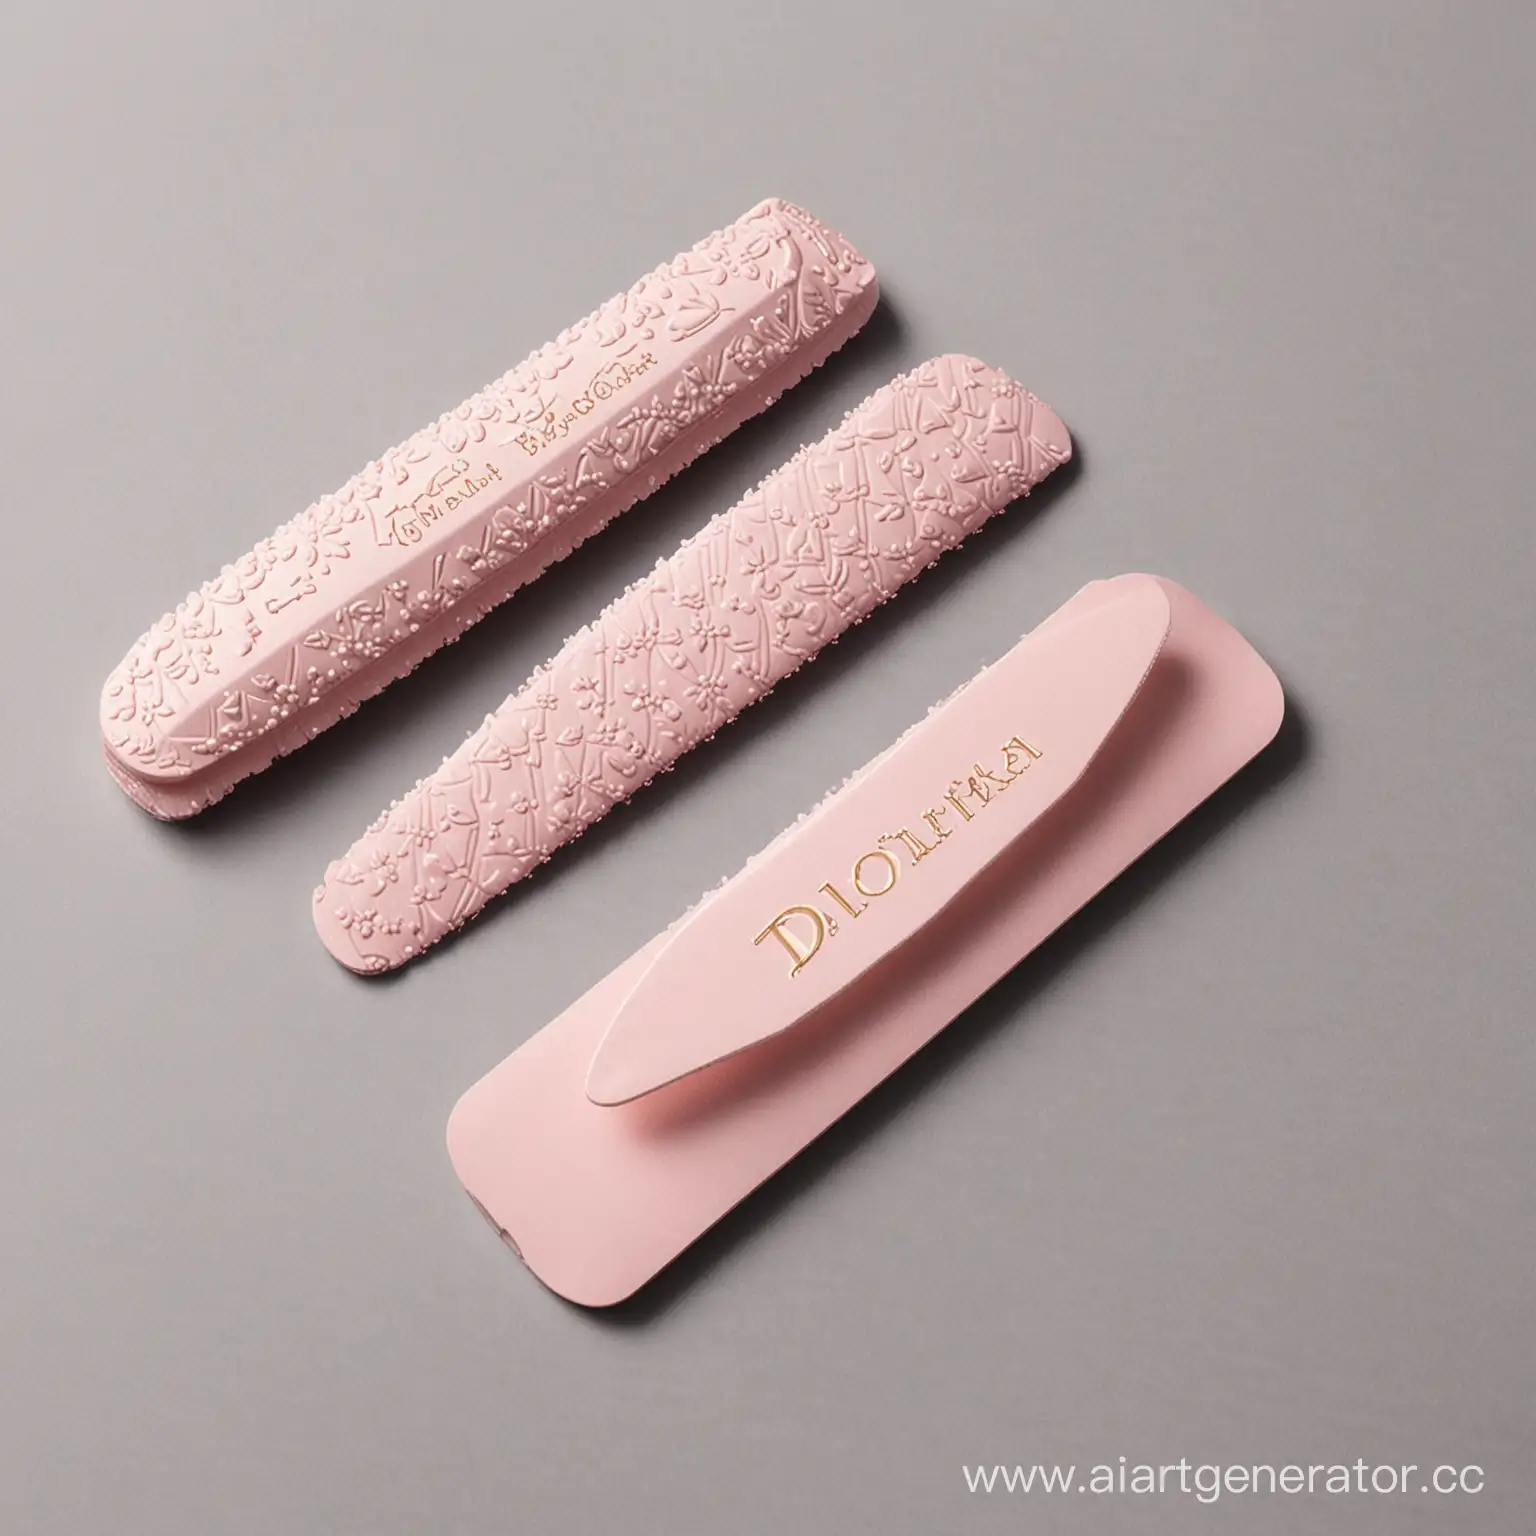 what would the packaging for nail files look like if it were made by Dior, L’Oréal, Max Factor